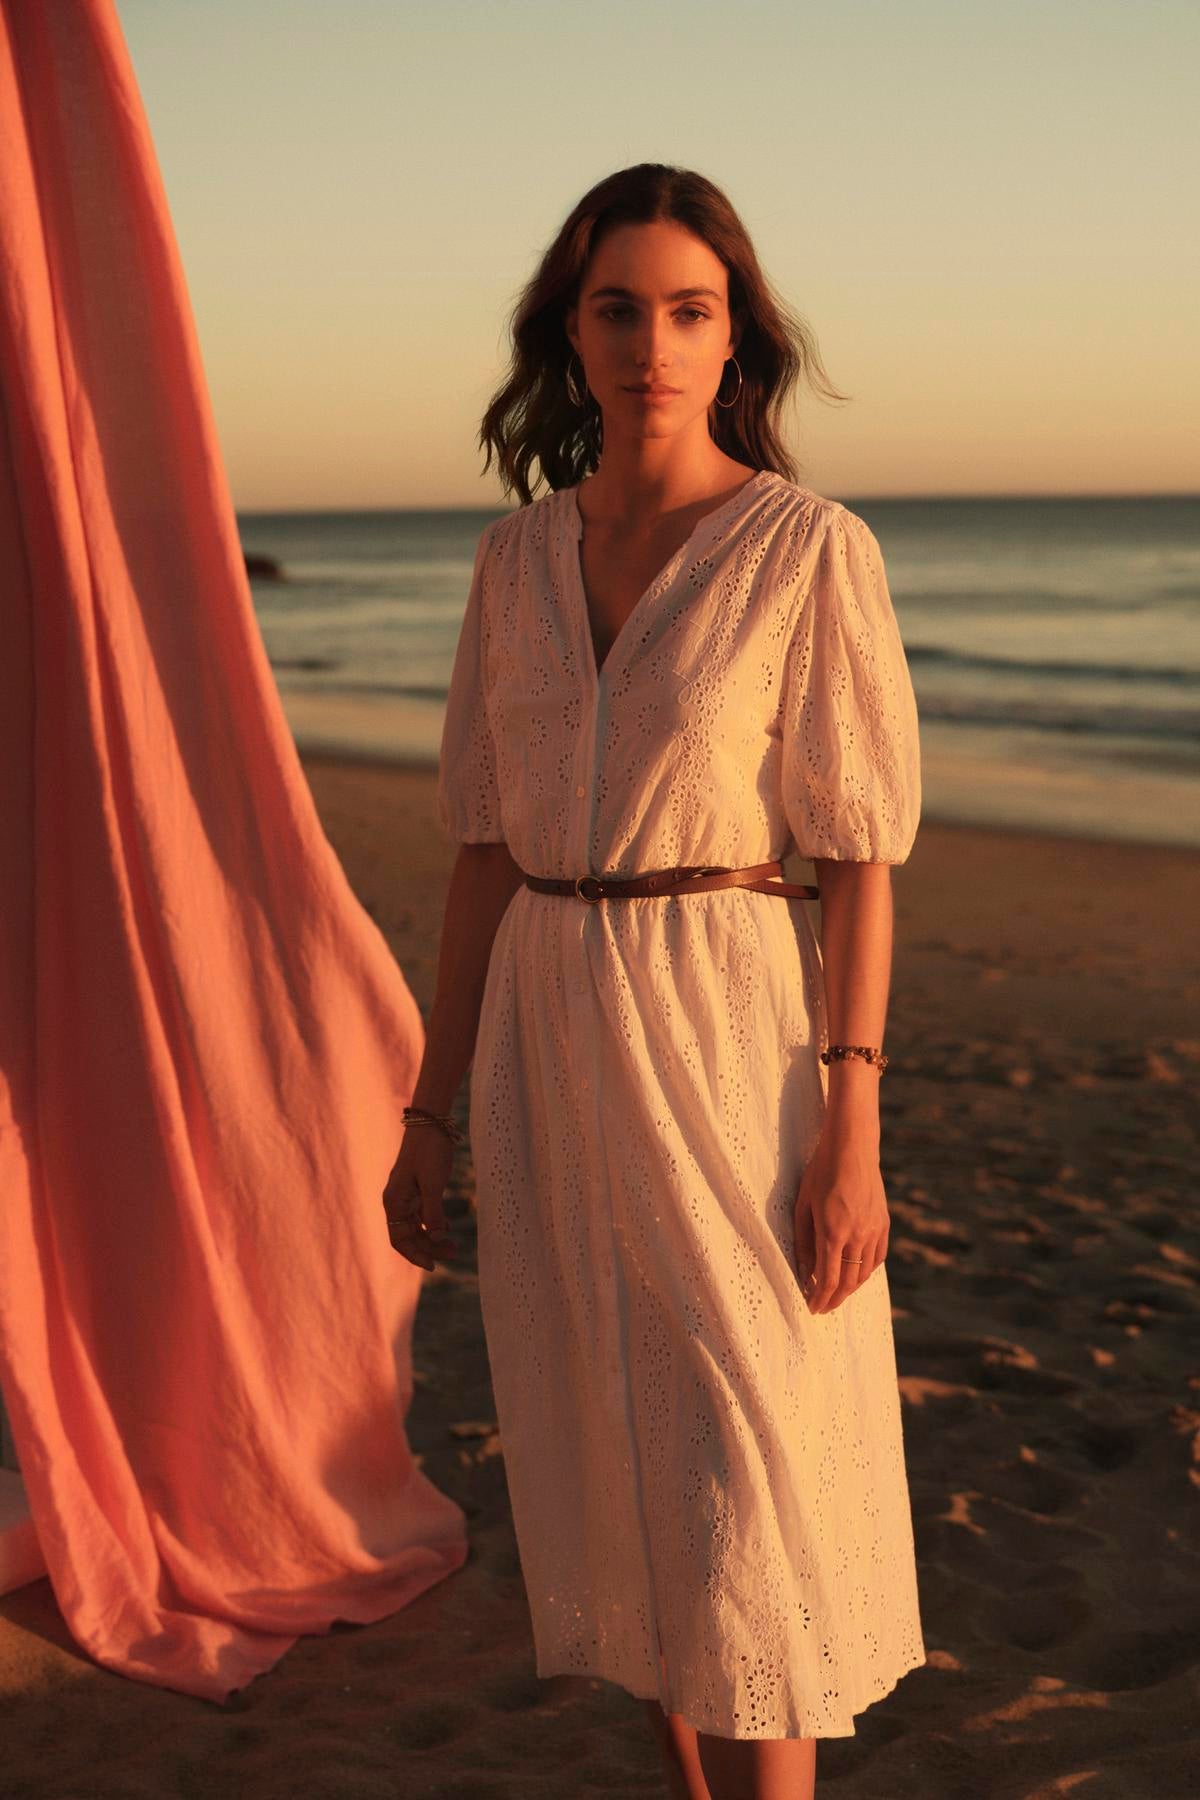 A woman in a white cotton eyelet RORI DRESS from Velvet by Graham & Spencer stands on a beach at sunset, with a pink fabric billowing in the background.-36910268055745